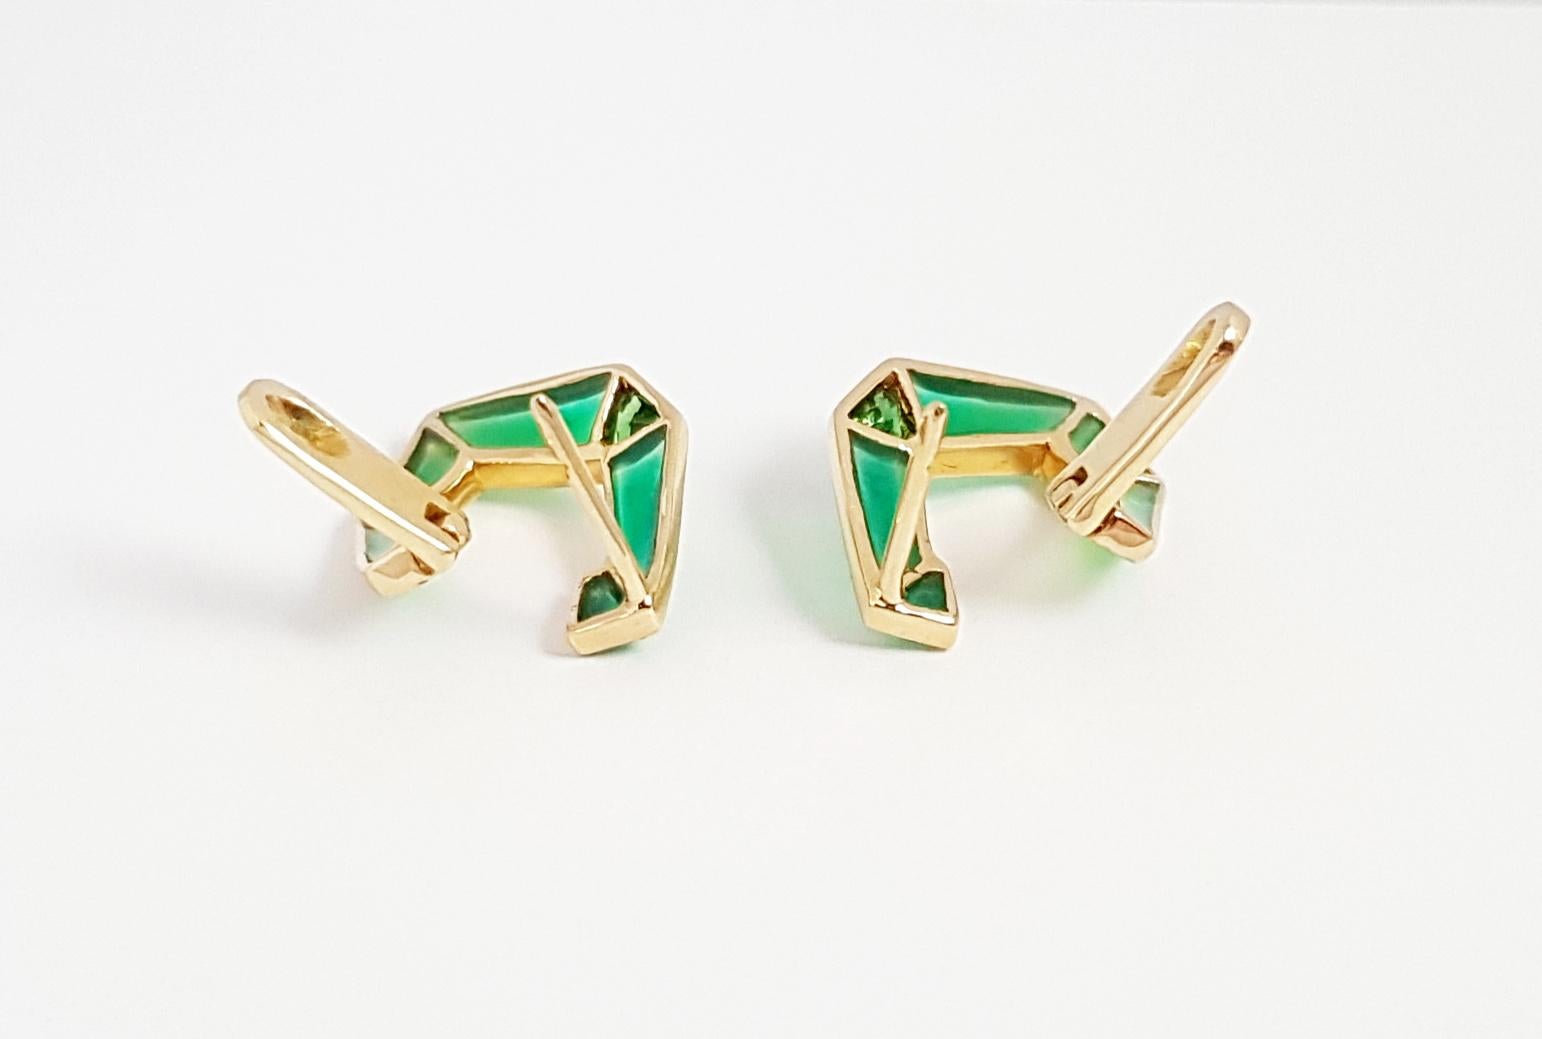 Origami Link No. 5 Tsavorite with Enamel Earrings 18K Yellow Gold Petite For Sale 1